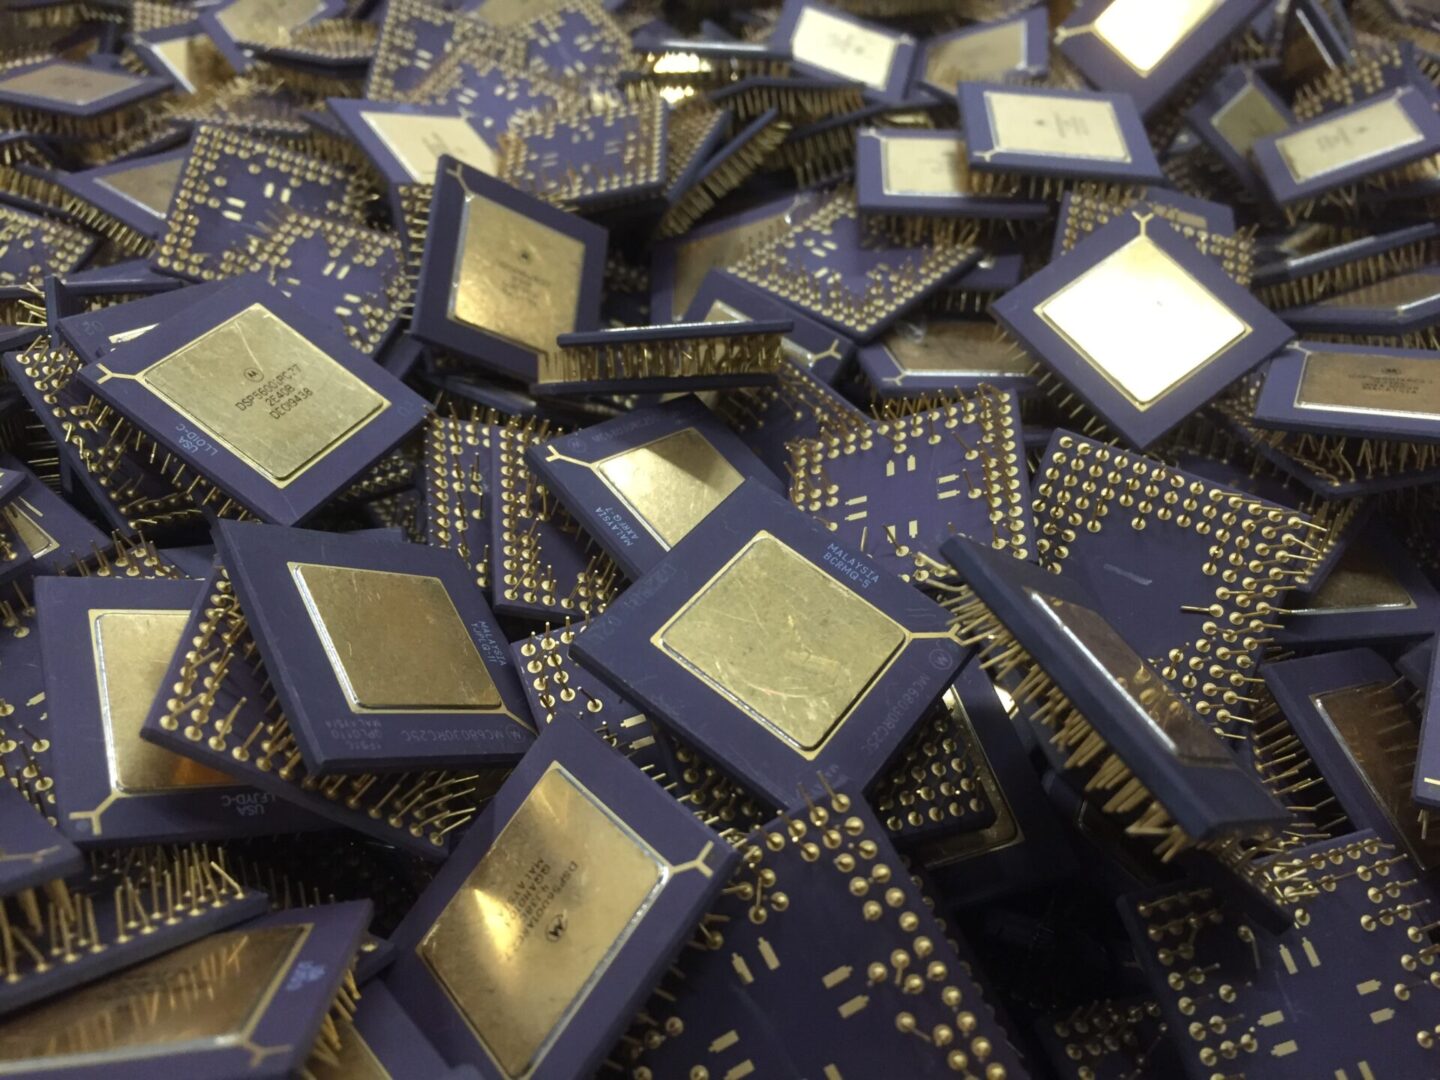 A pile of computer chips with gold on them.